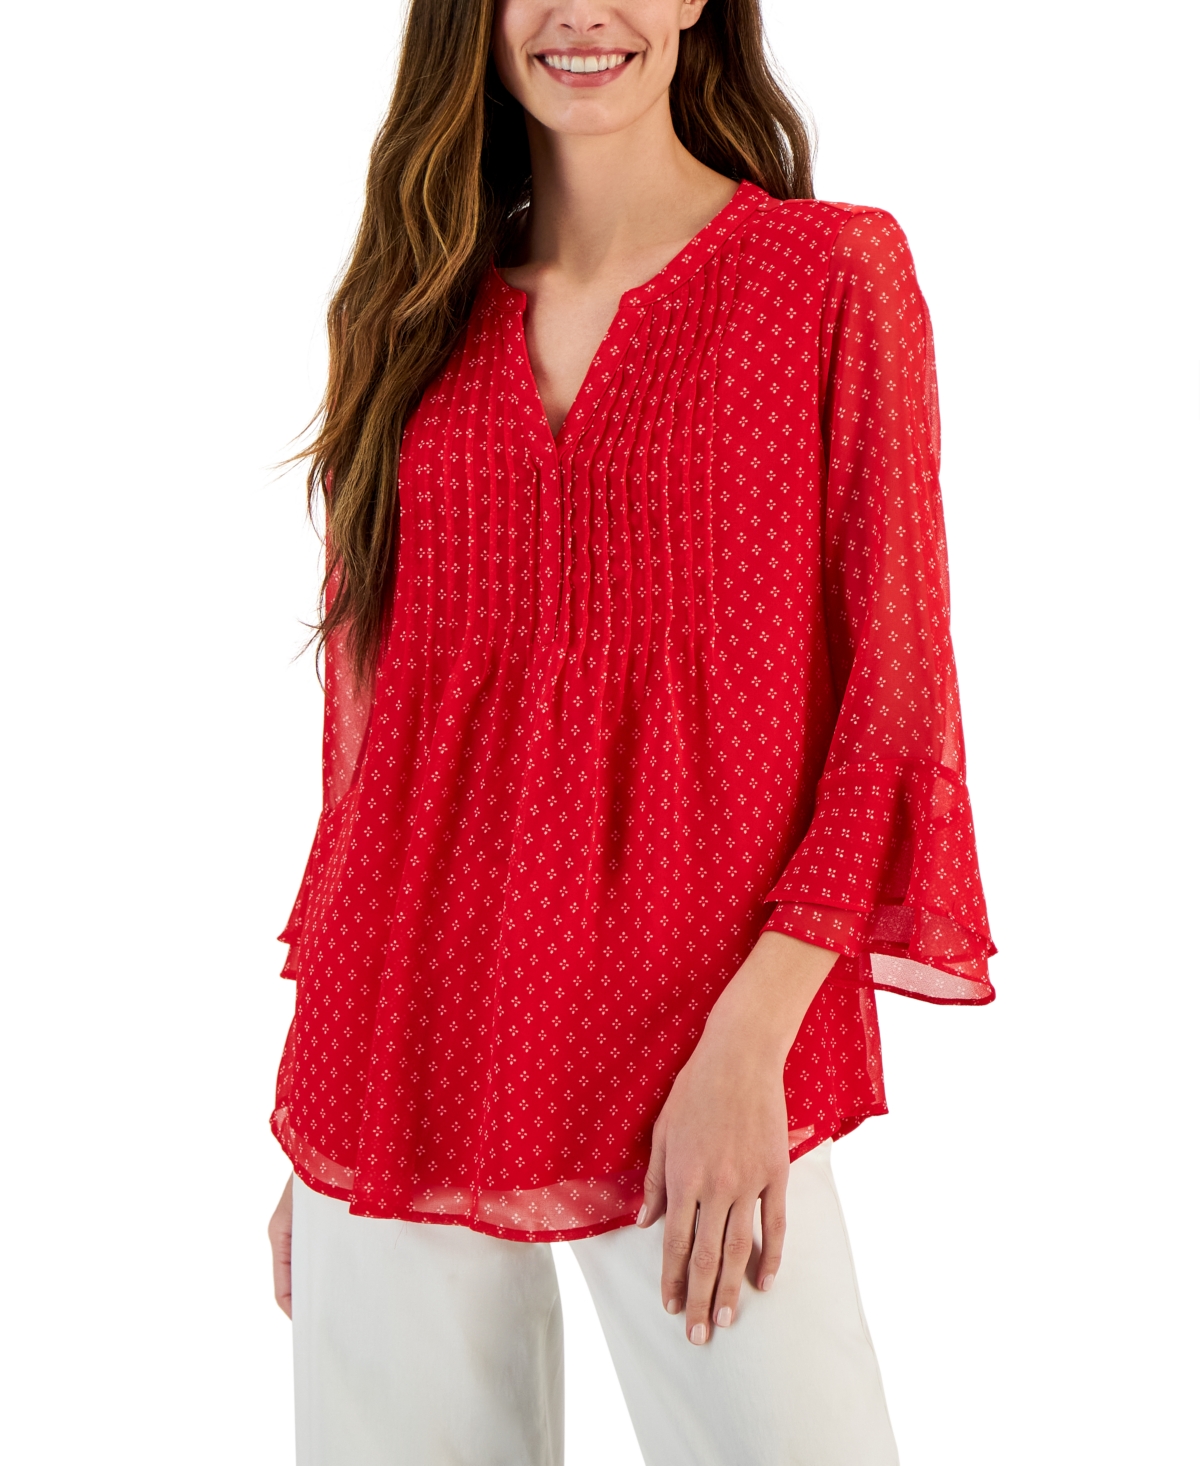 CHARTER CLUB WOMEN'S PRINTED PINTUCK TOP, CREATED FOR MACY'S